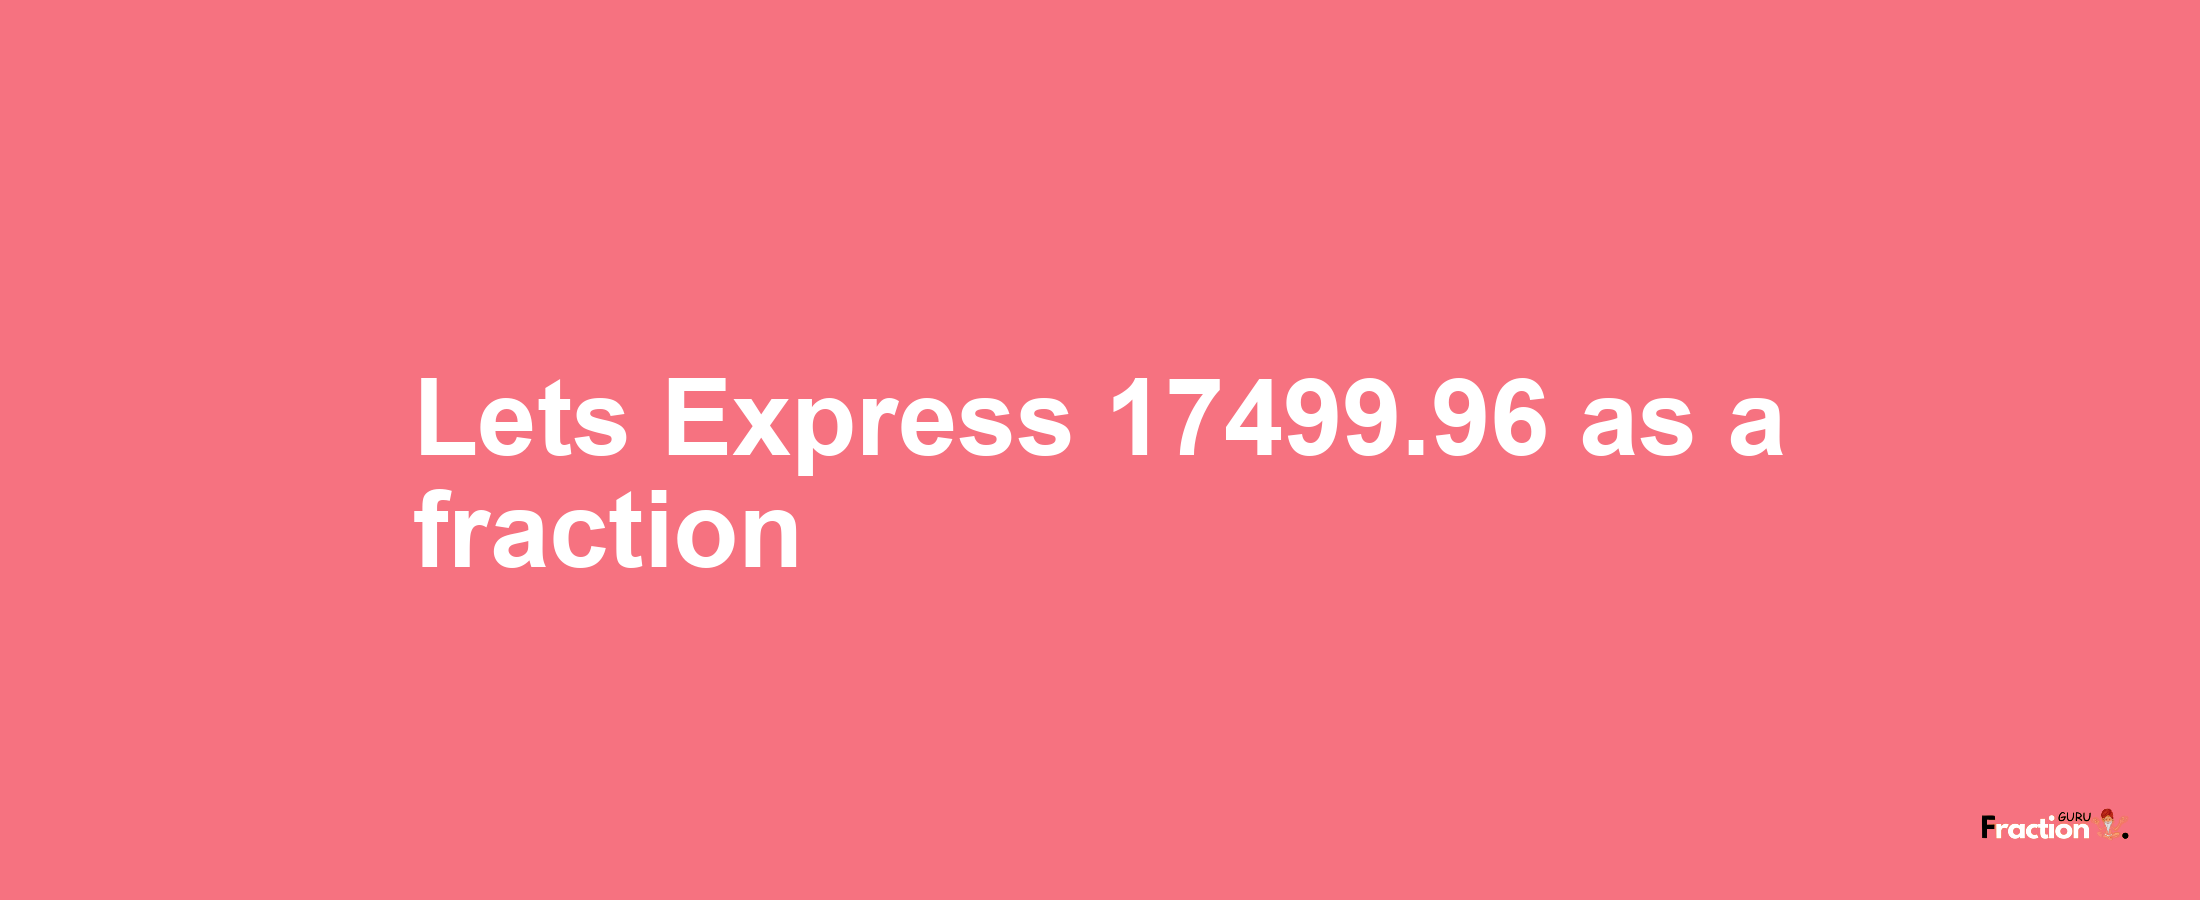 Lets Express 17499.96 as afraction